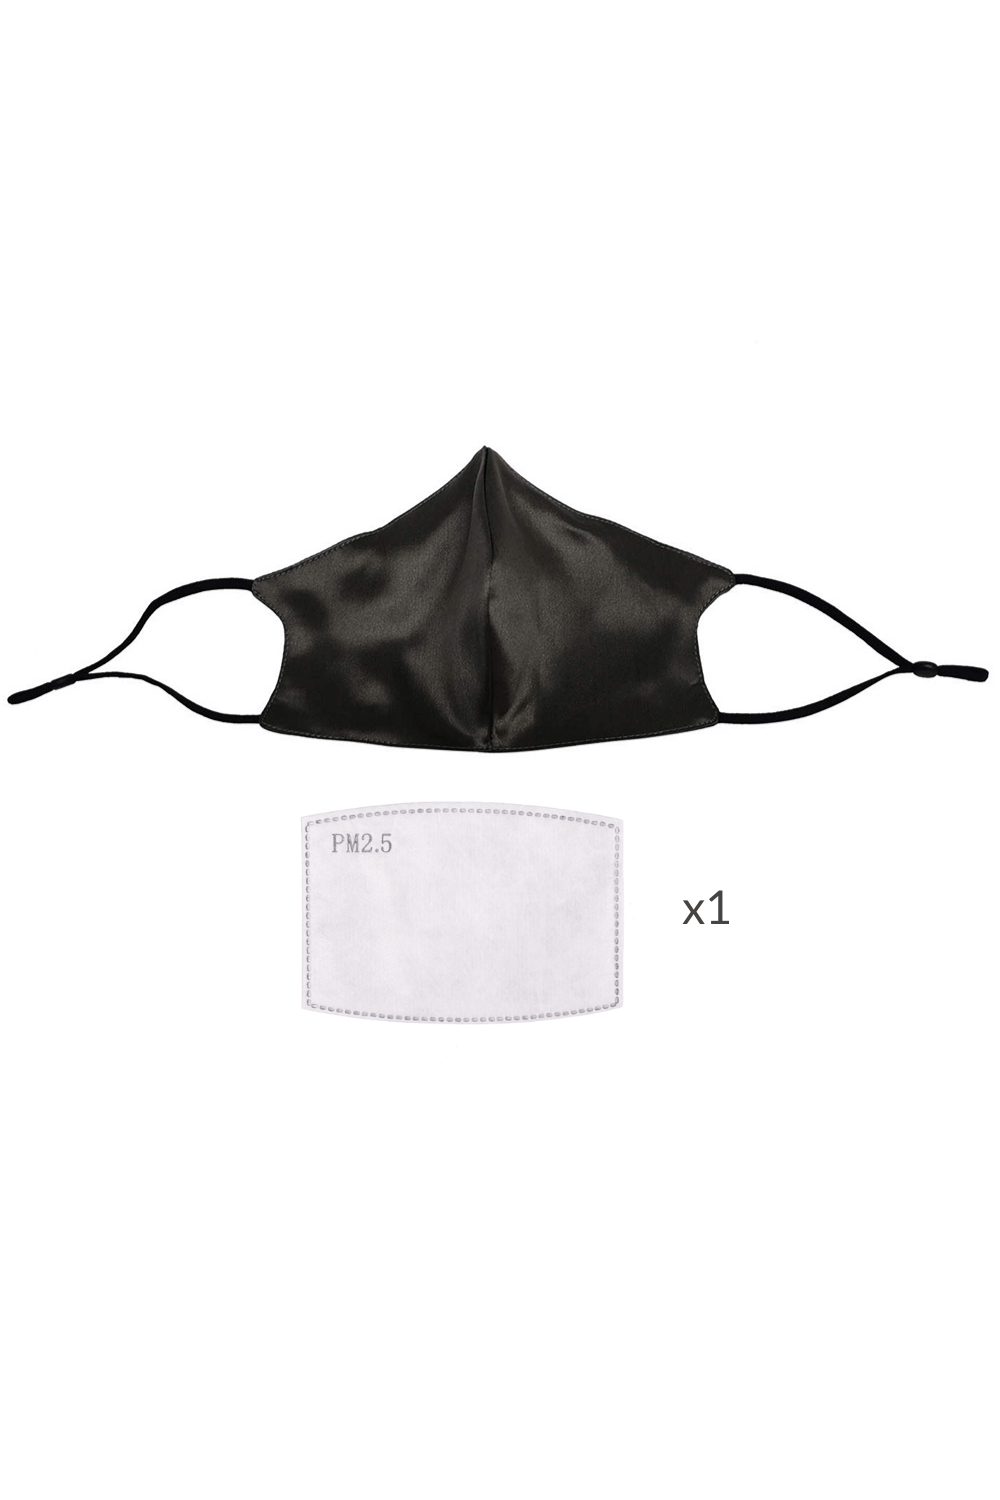 STELLAR Silk Face Mask - Black (with Nose Wire and Filter Pocket) - BASK ™